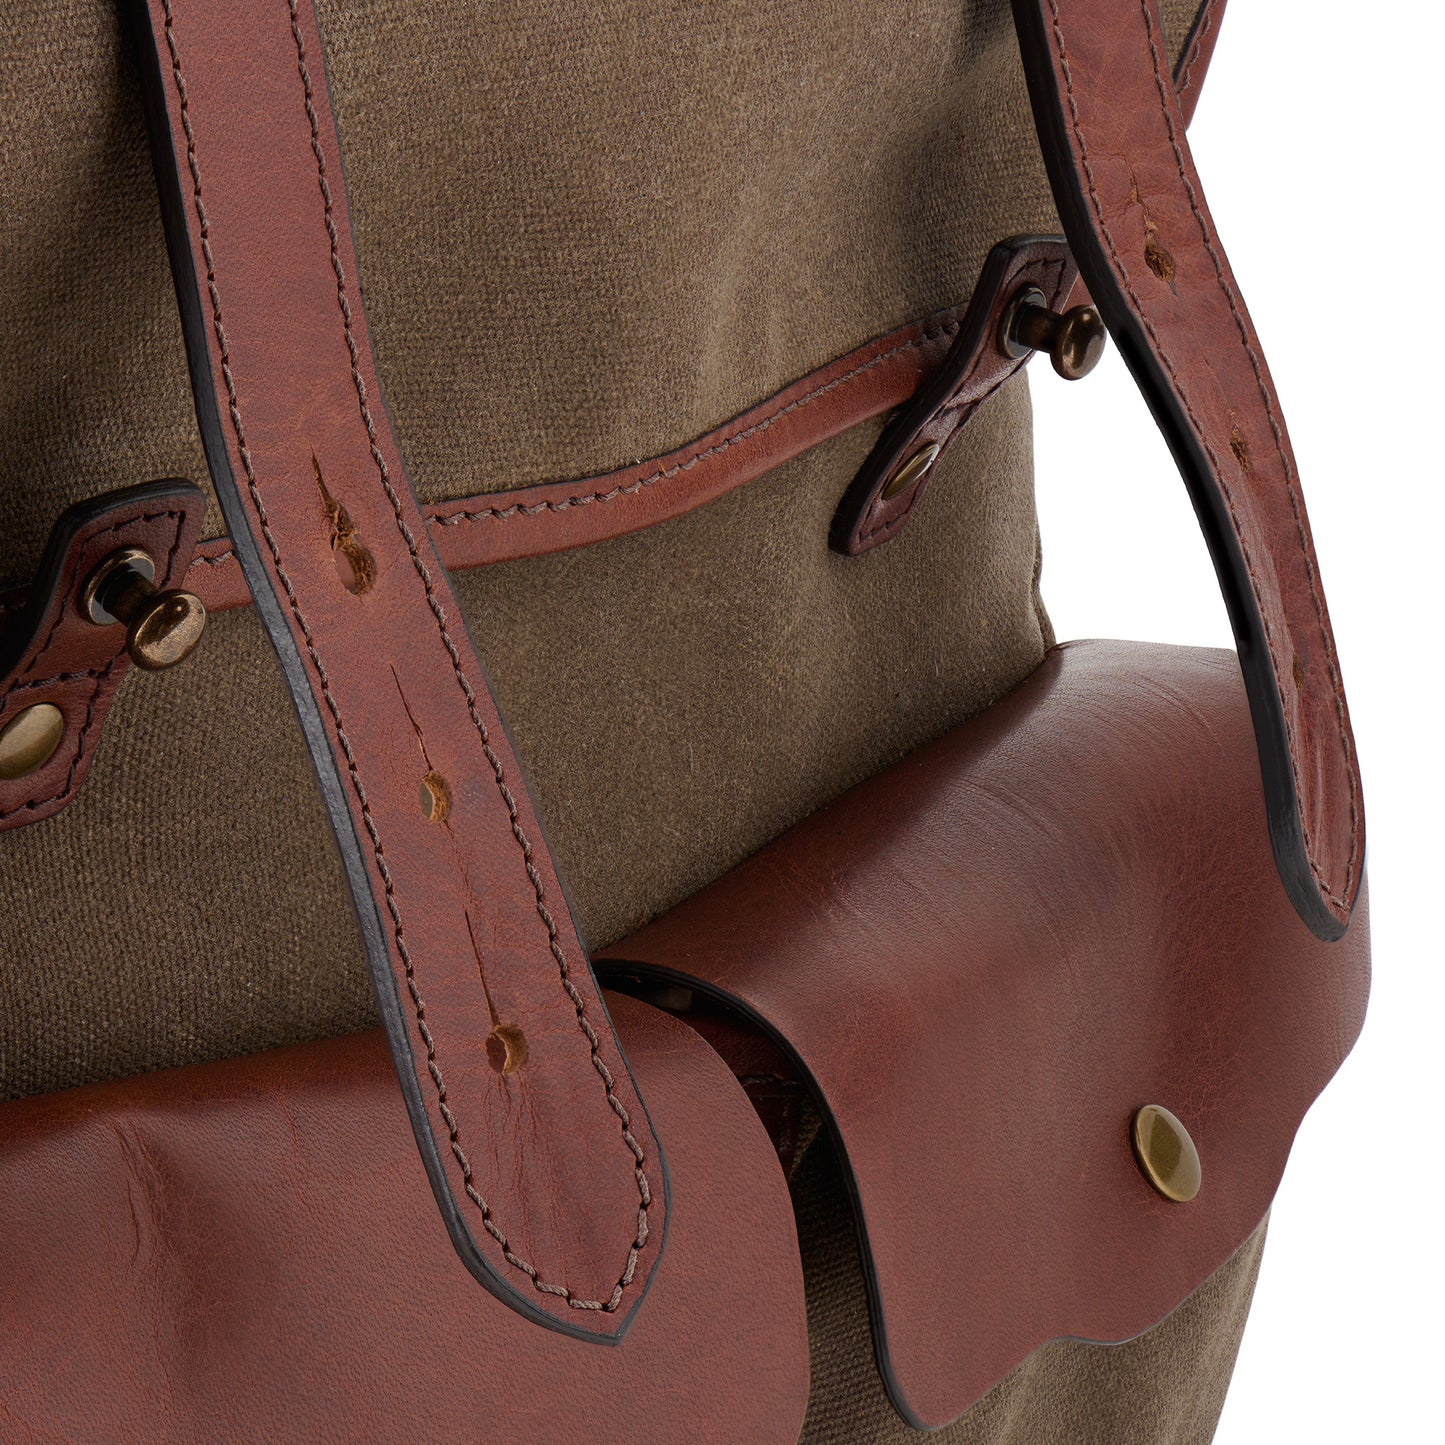 Founder's Backpack close up detail open straps vintage brown leather waxed canvas field tan color